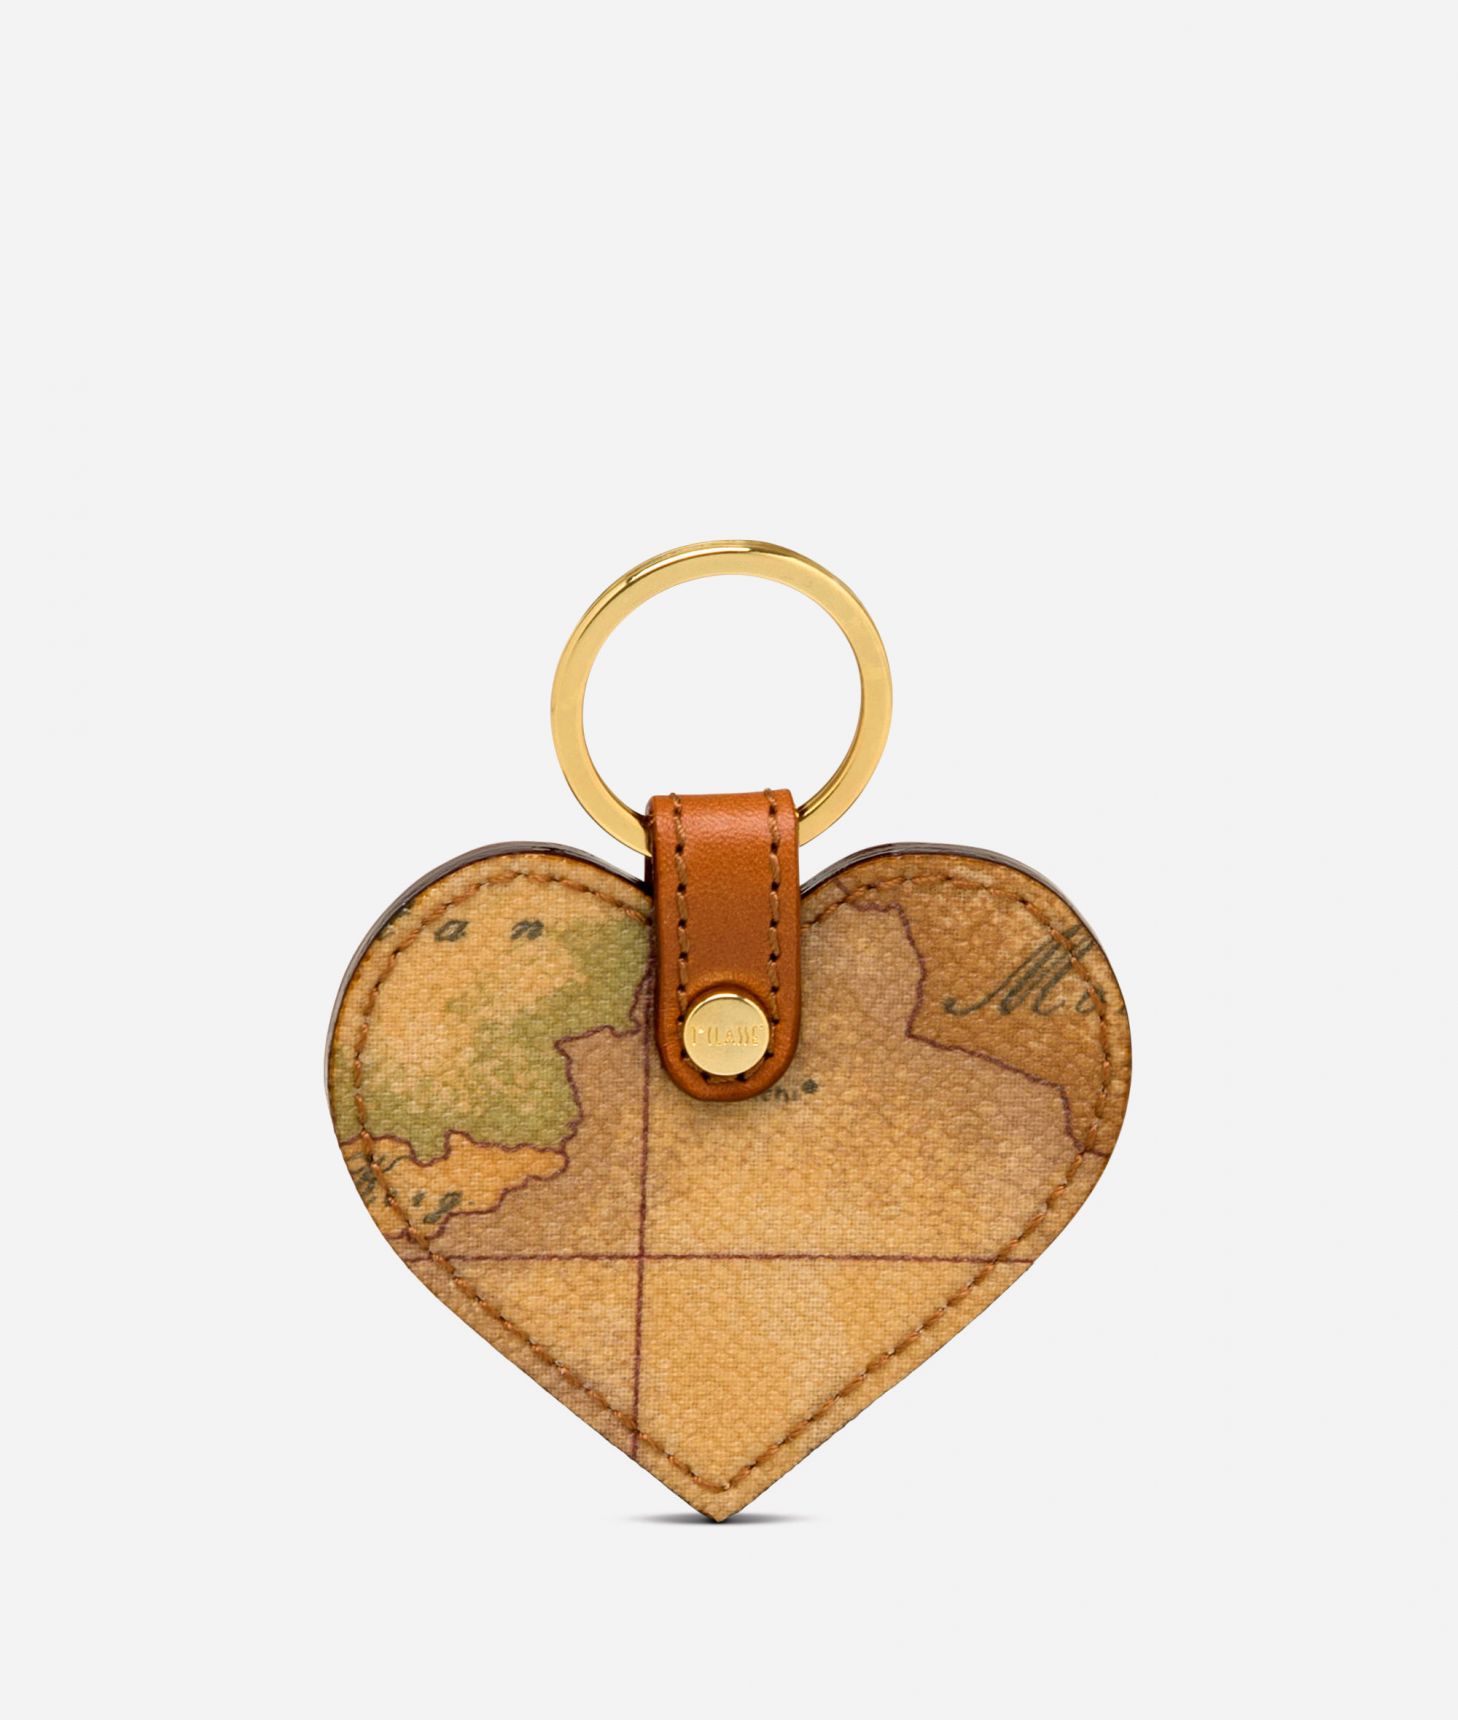 Geo Classic Heart shaped key ring,front